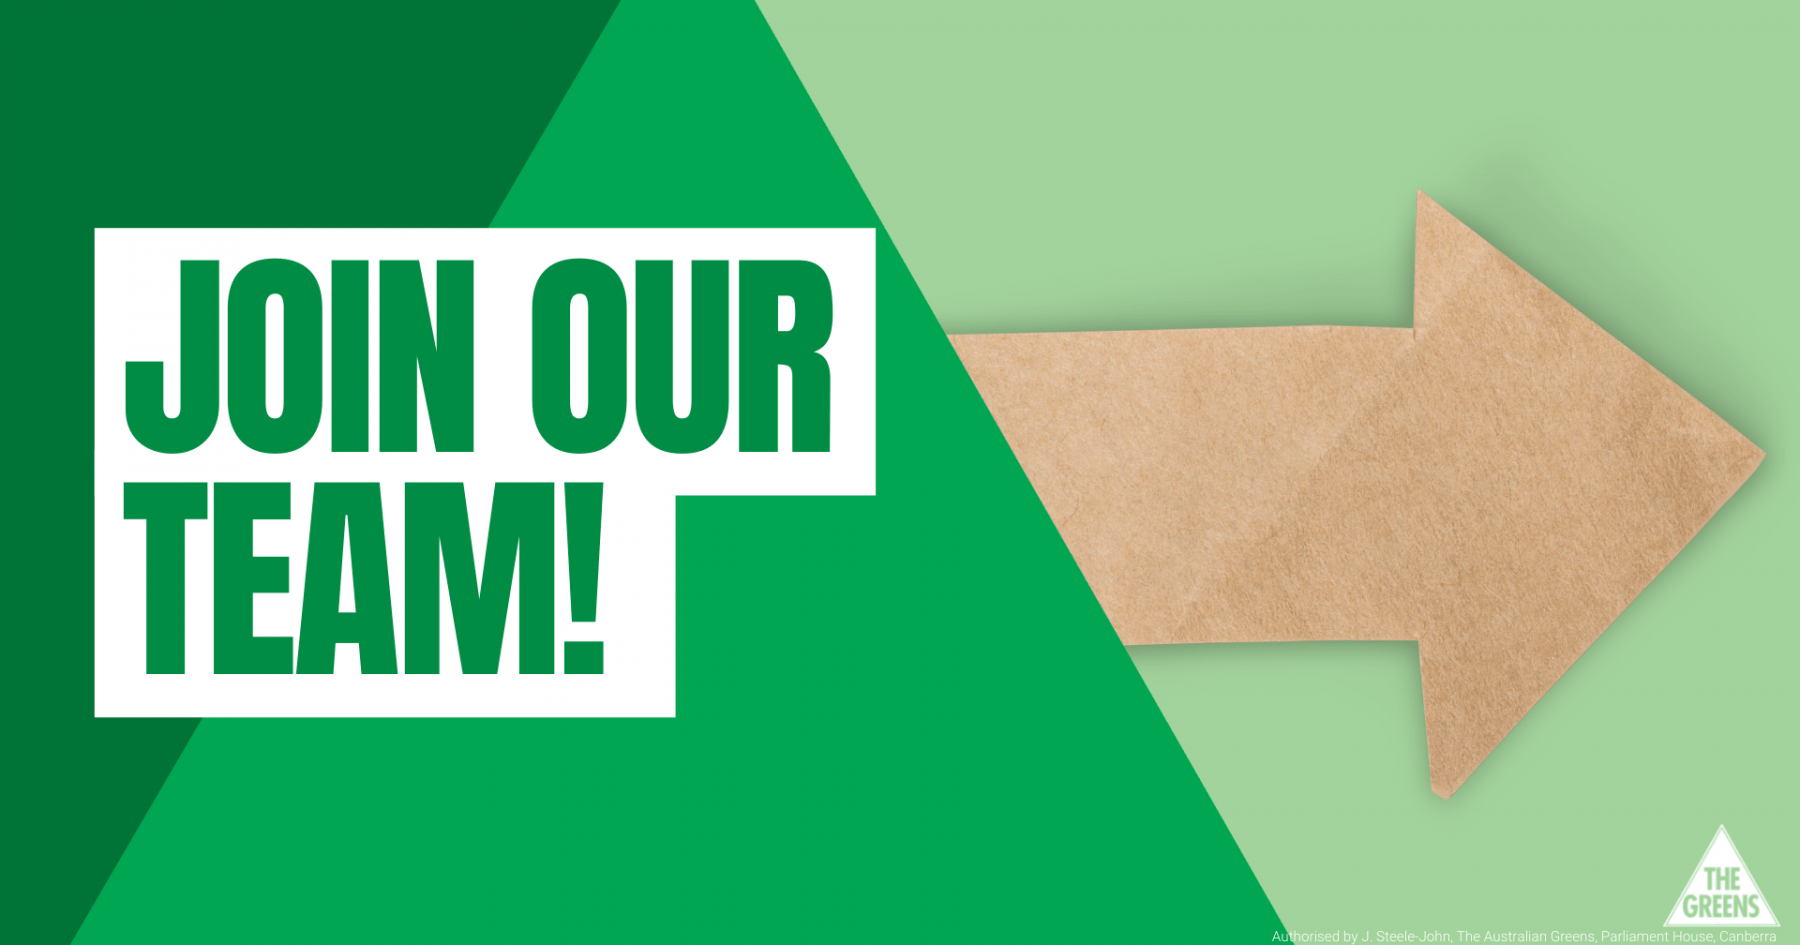 A green background with writing that says "JOIN OUR TEAM" and an arrow pointing towards the sign up form.